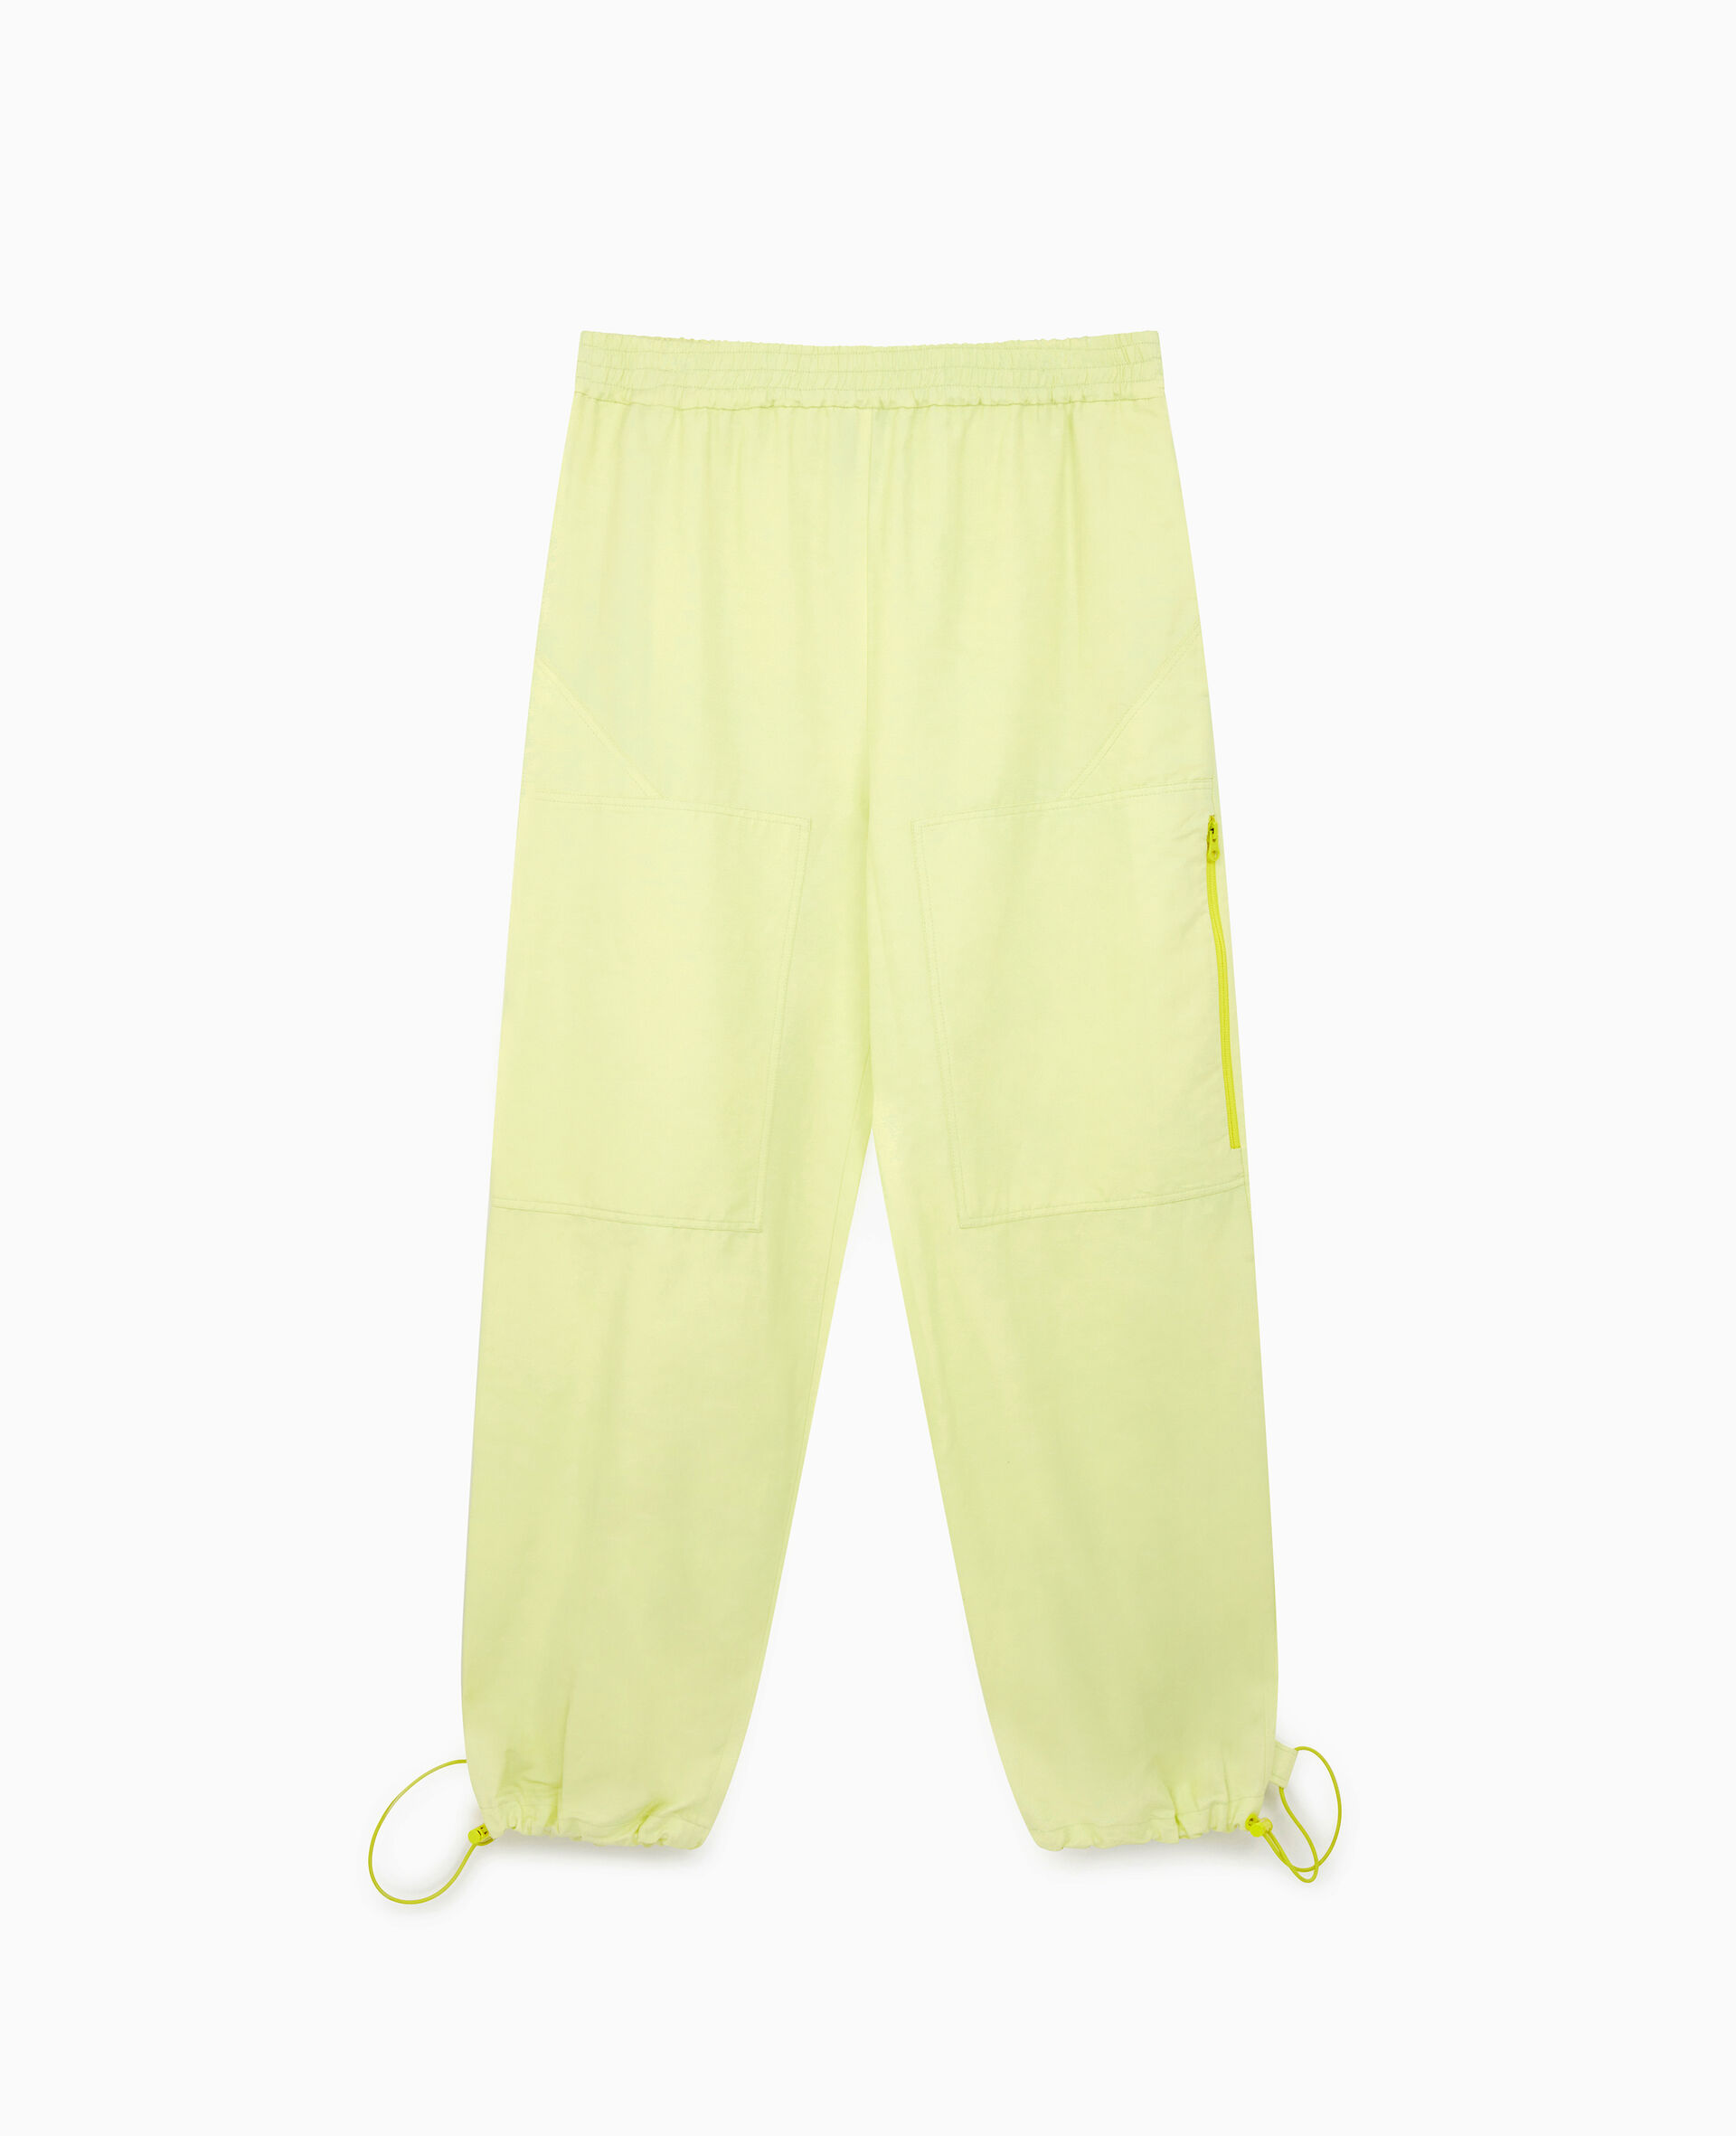 Zip pocket Trousers-Yellow-large image number 0